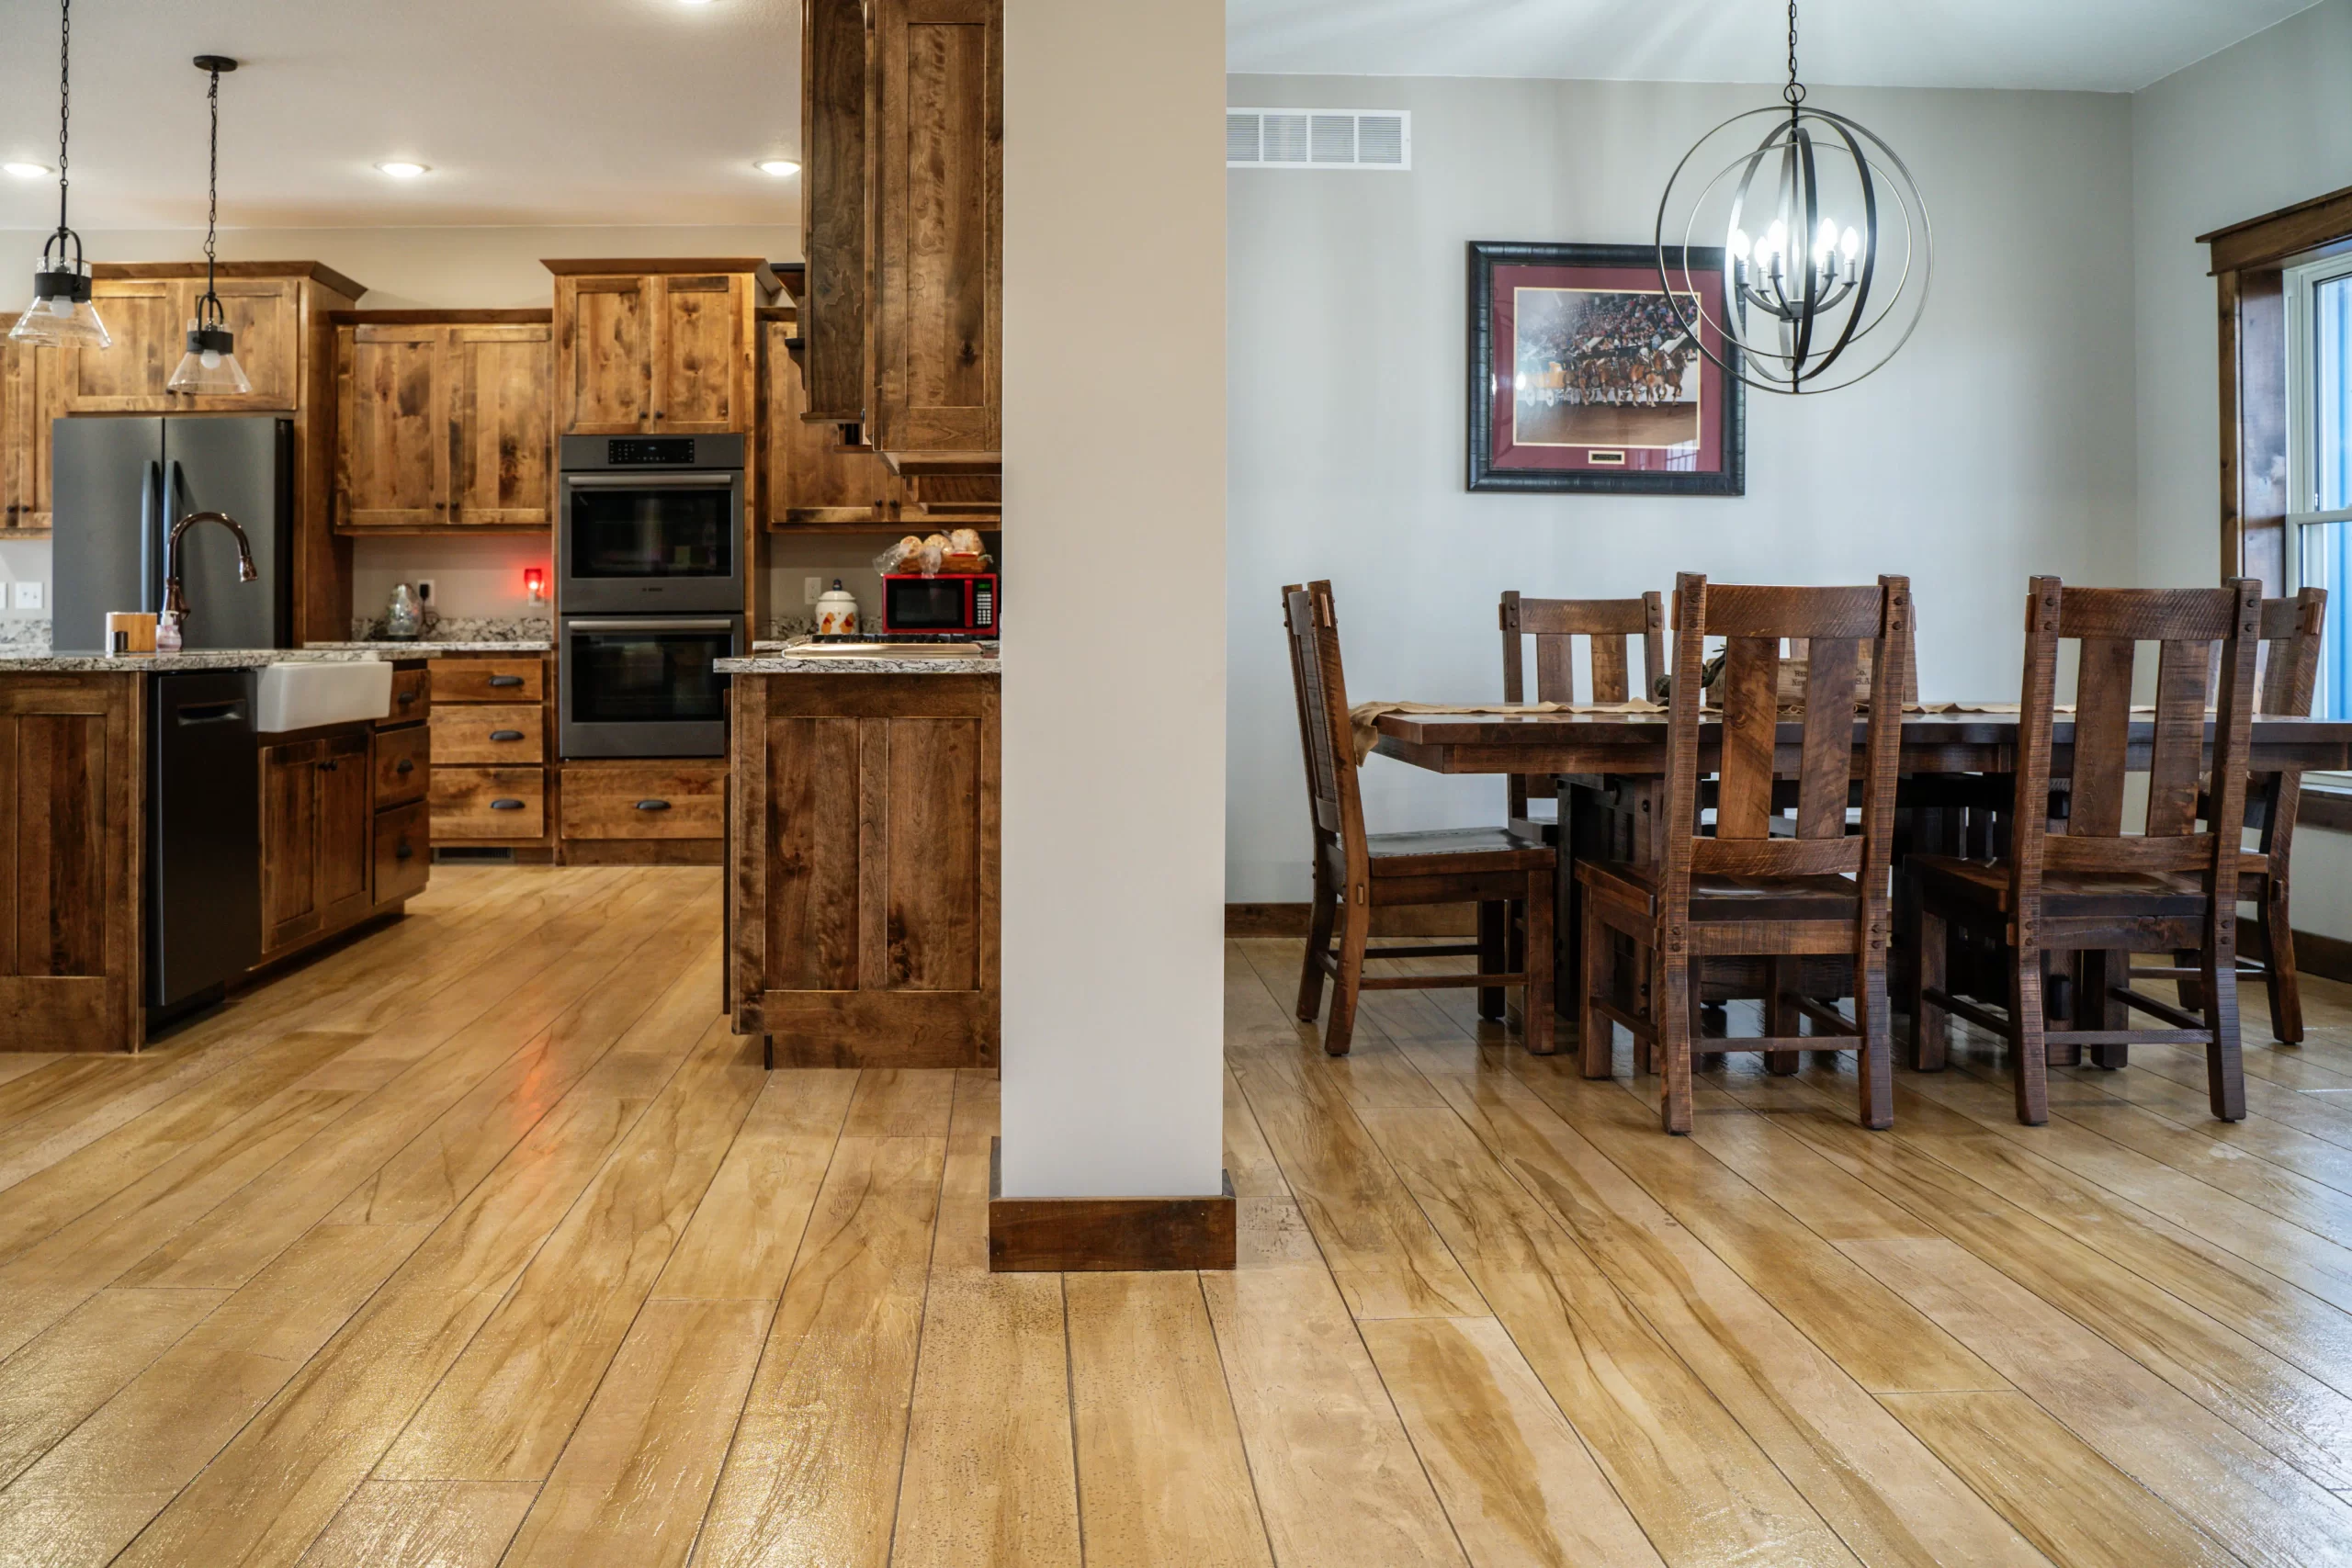 A rustic wood concrete floor in a modern kitchen.